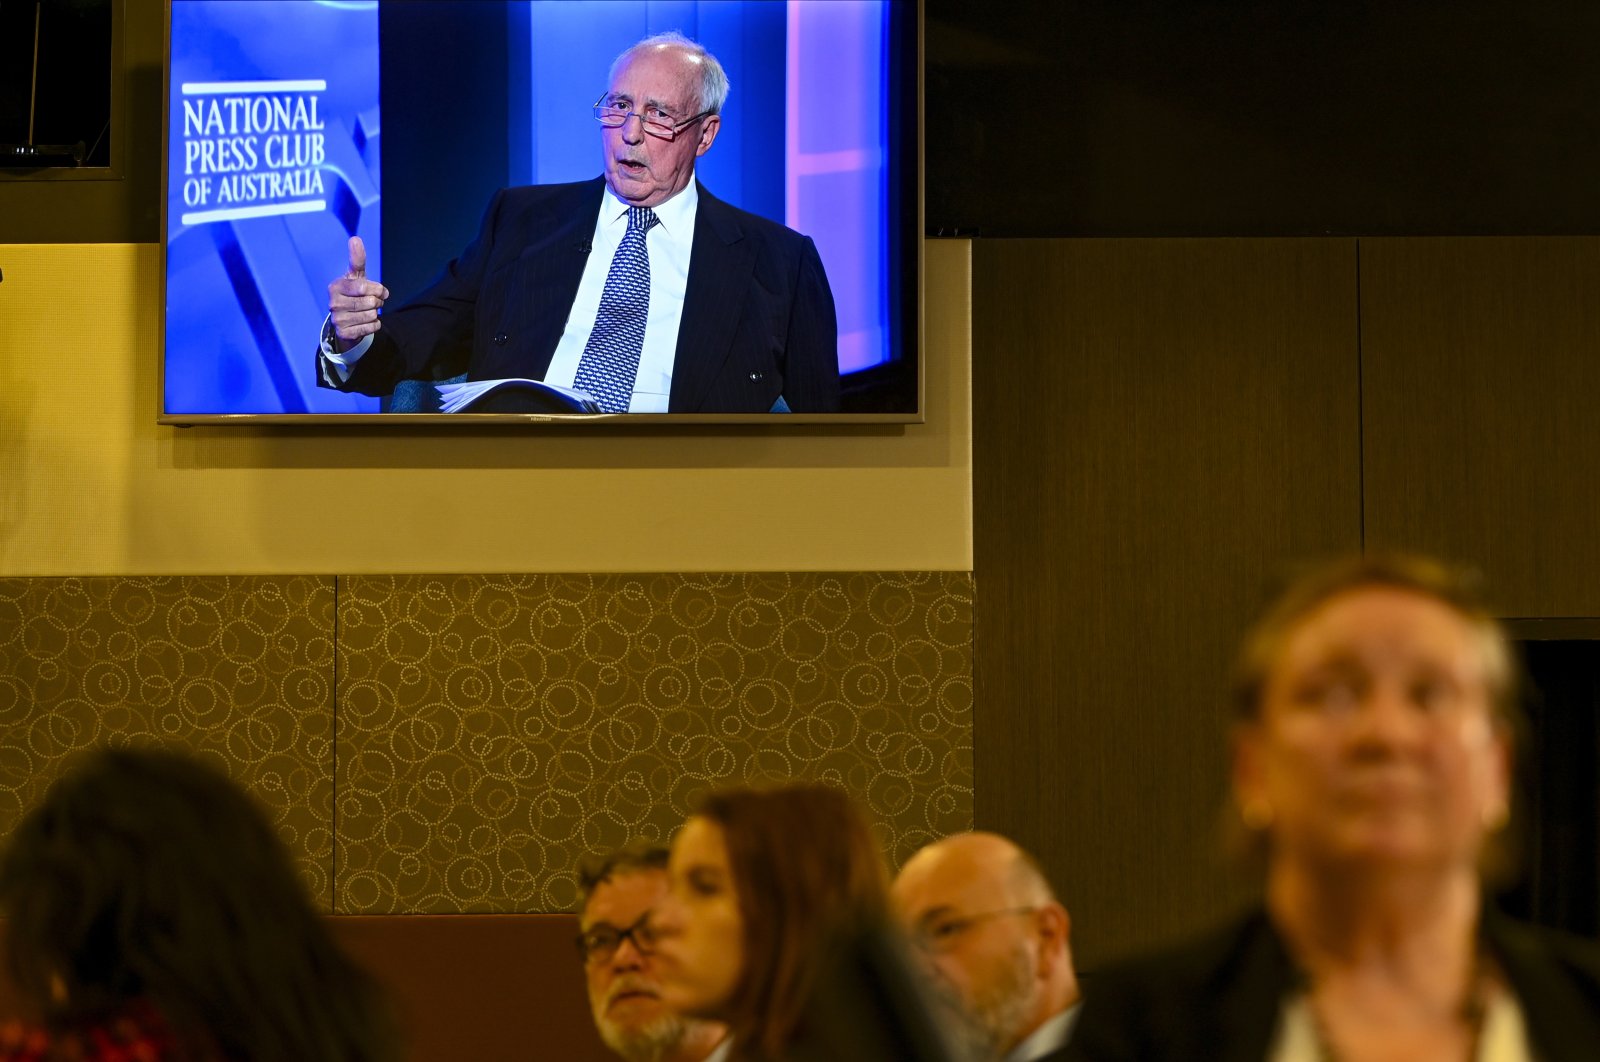 Former Australian Prime Minister Paul Keating appears virtually from Sydney, to address the National Press Club in Canberra, Australia, Nov. 10, 2021. (AP Photo)